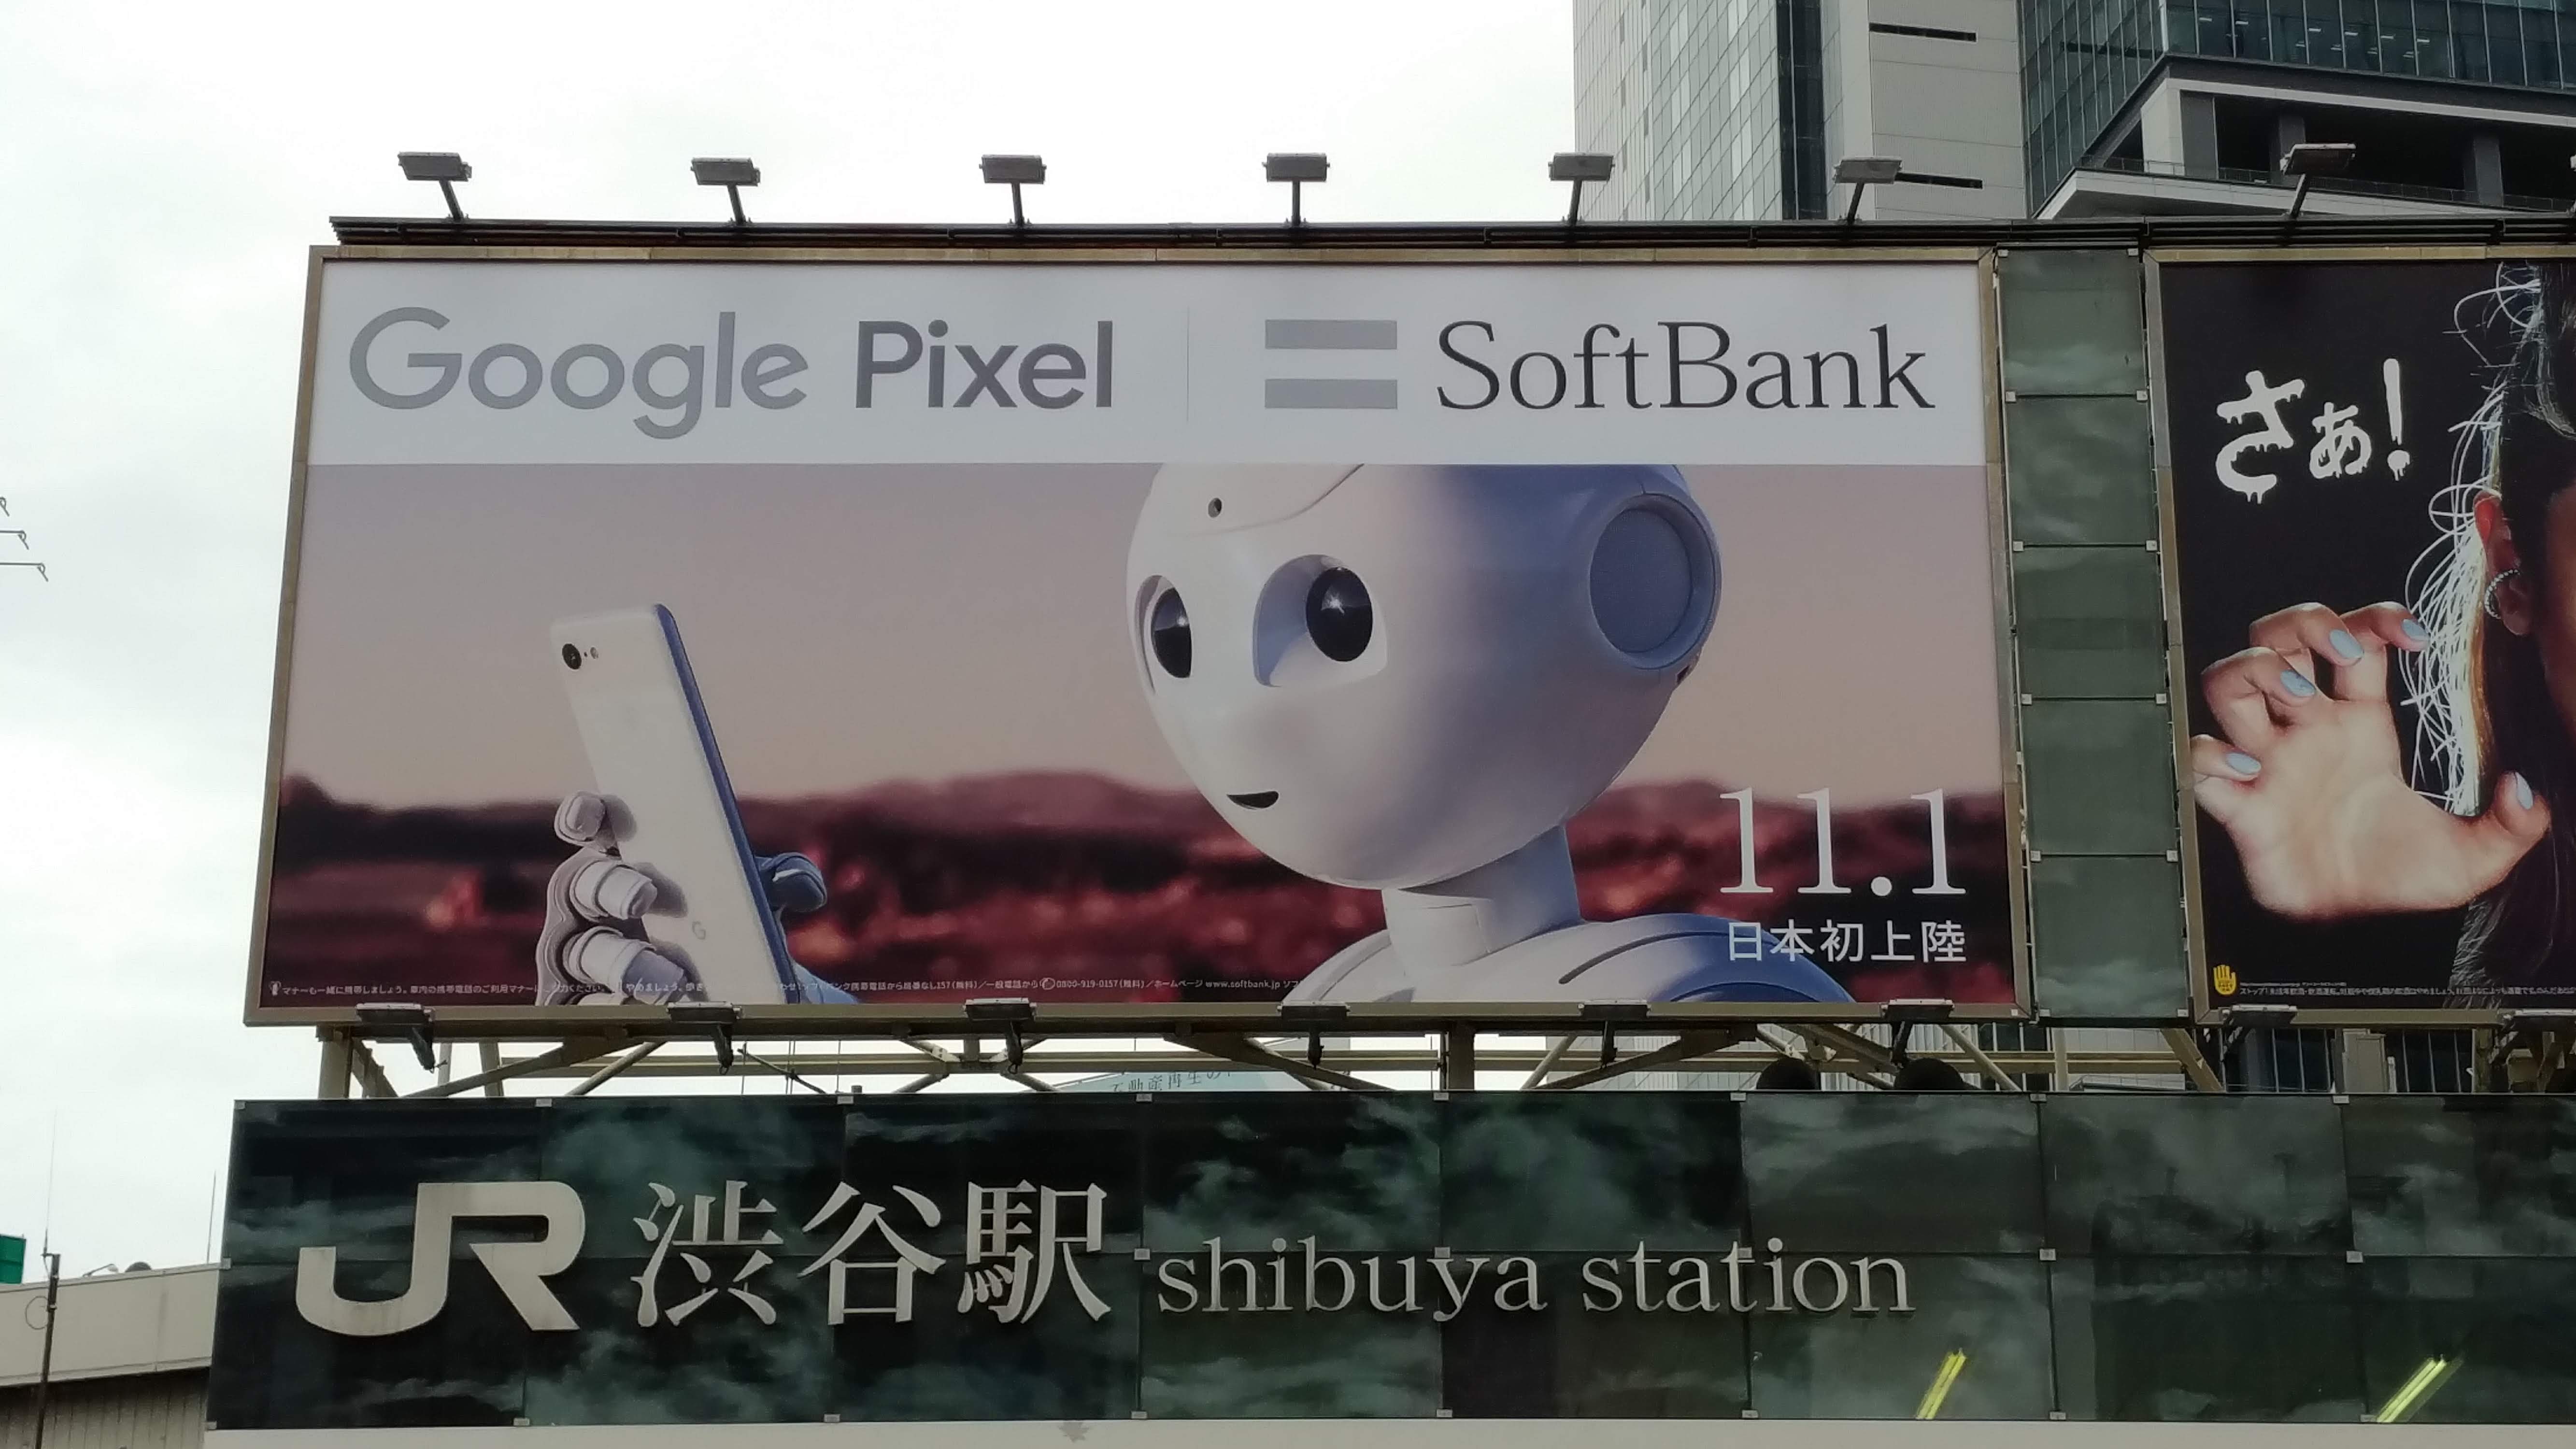 JR shibuya station billboard with text google pixel = softbank and an image of a robot holding a smartphone